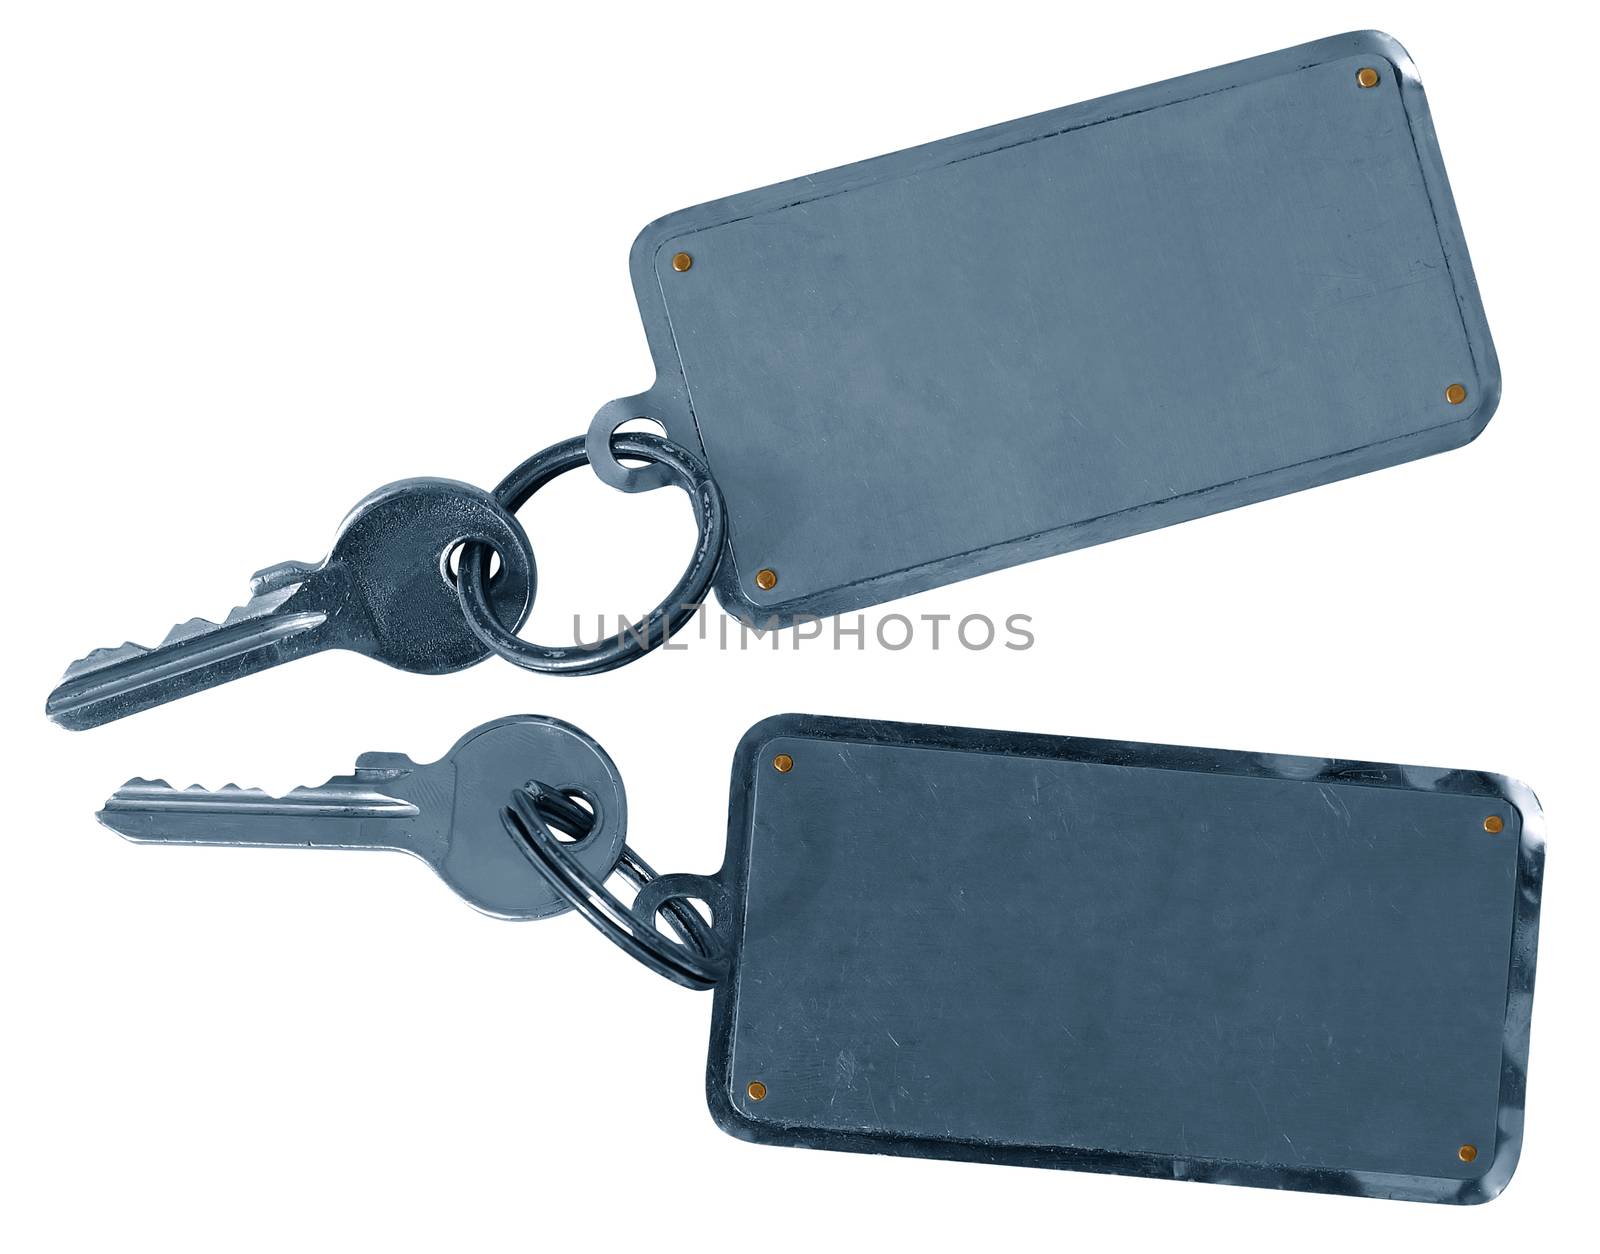 Two hotels room keys with labels isolated over white. Image contains clipping path.